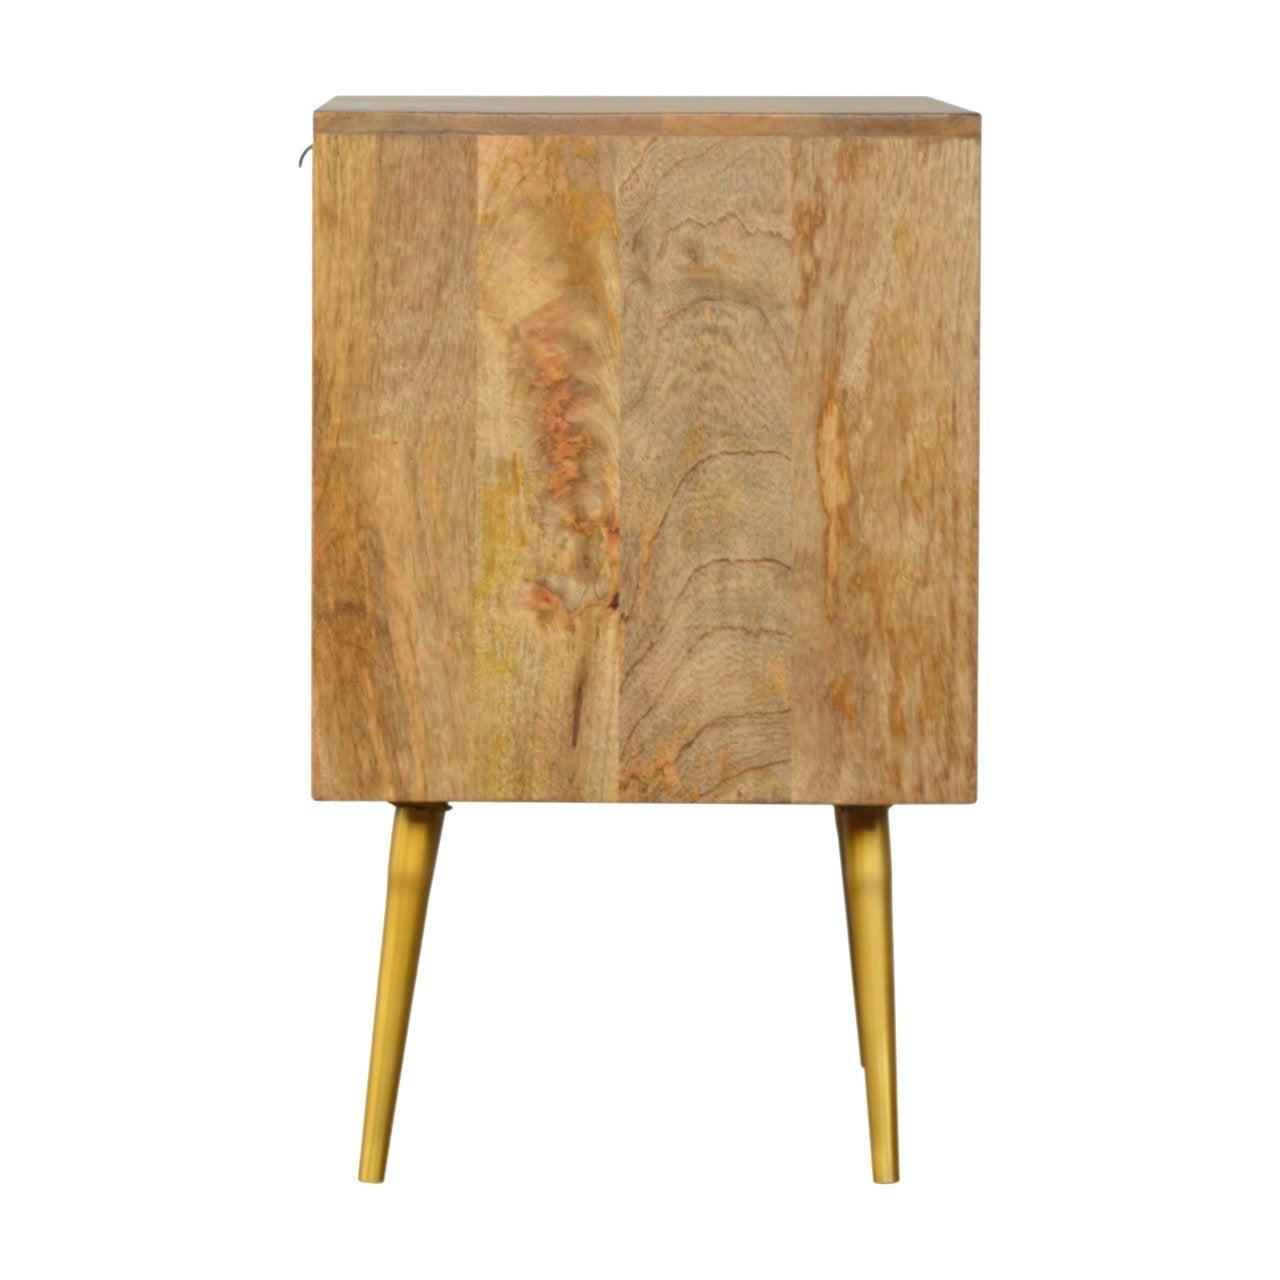 Sleek cement brass inlay bedside table with open slot - crimblefest furniture - image 9